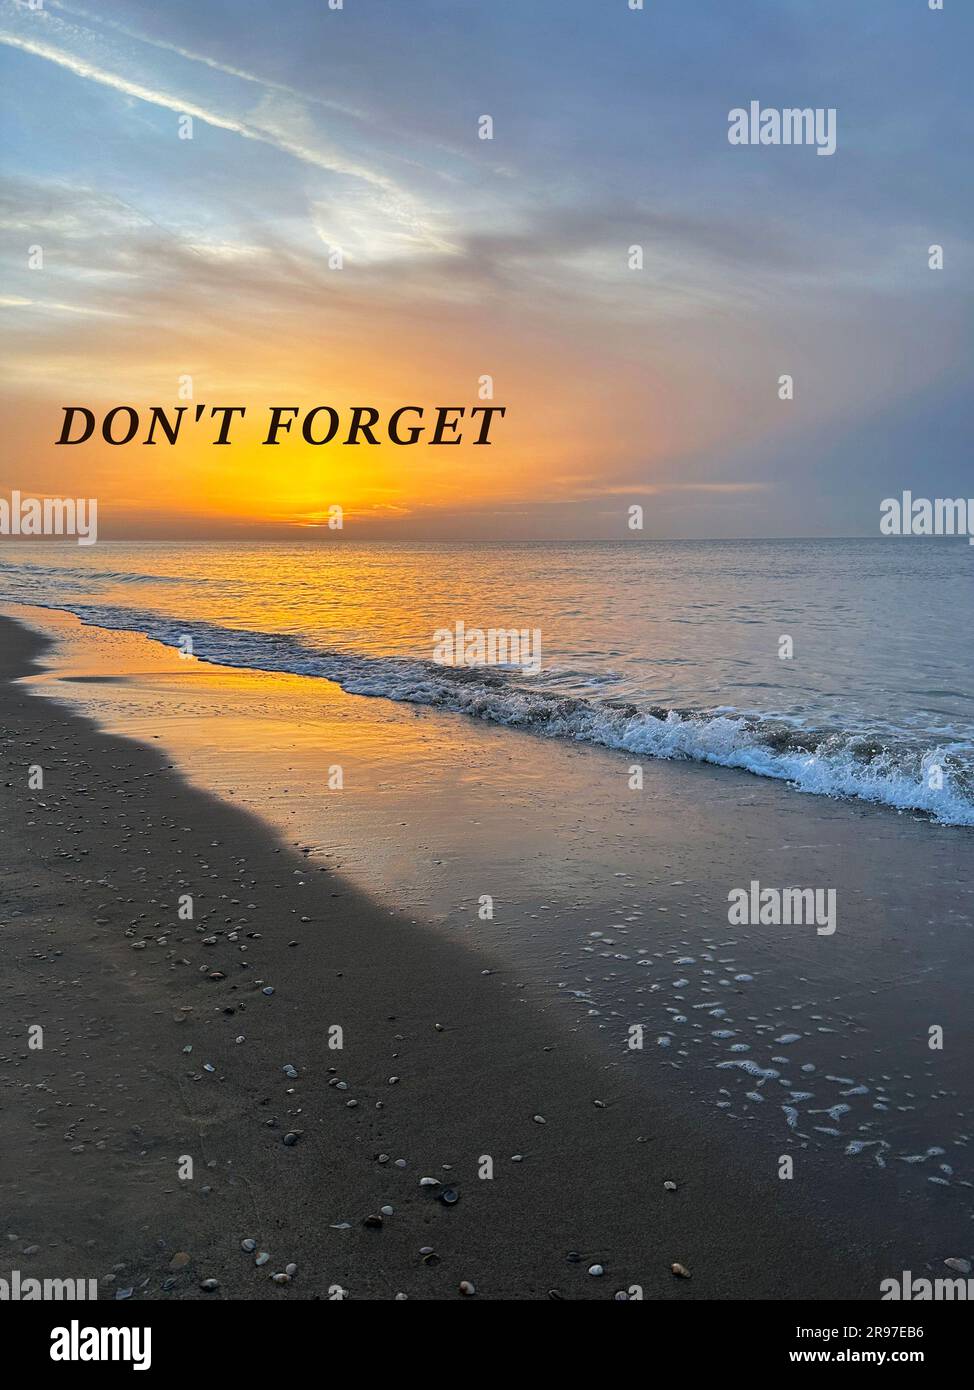 Don't forget, affirmation. Sea waves rolling onto sandy beach at sunrise Stock Photo